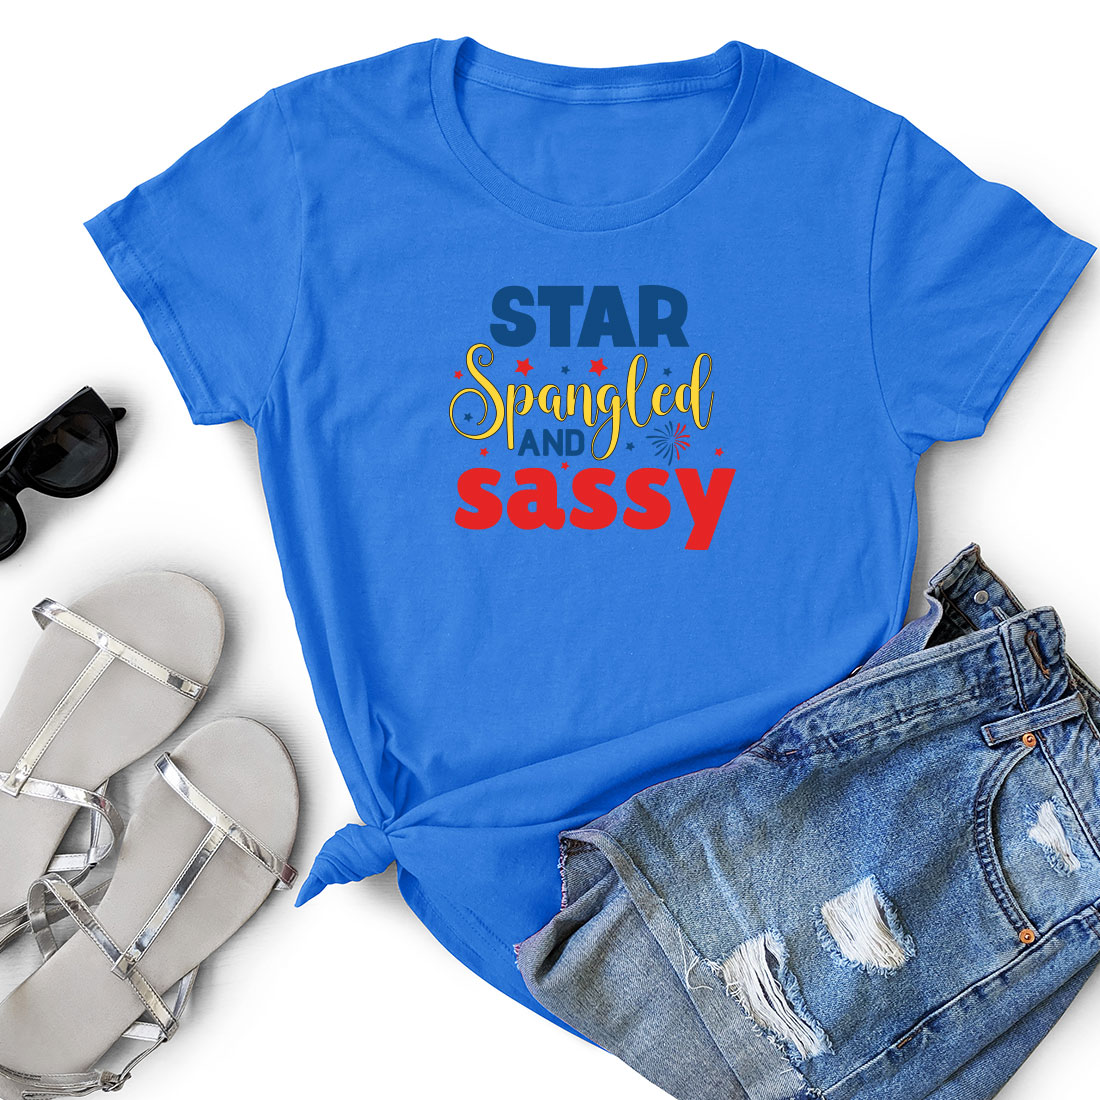 T - shirt that says star spangled and sassy.